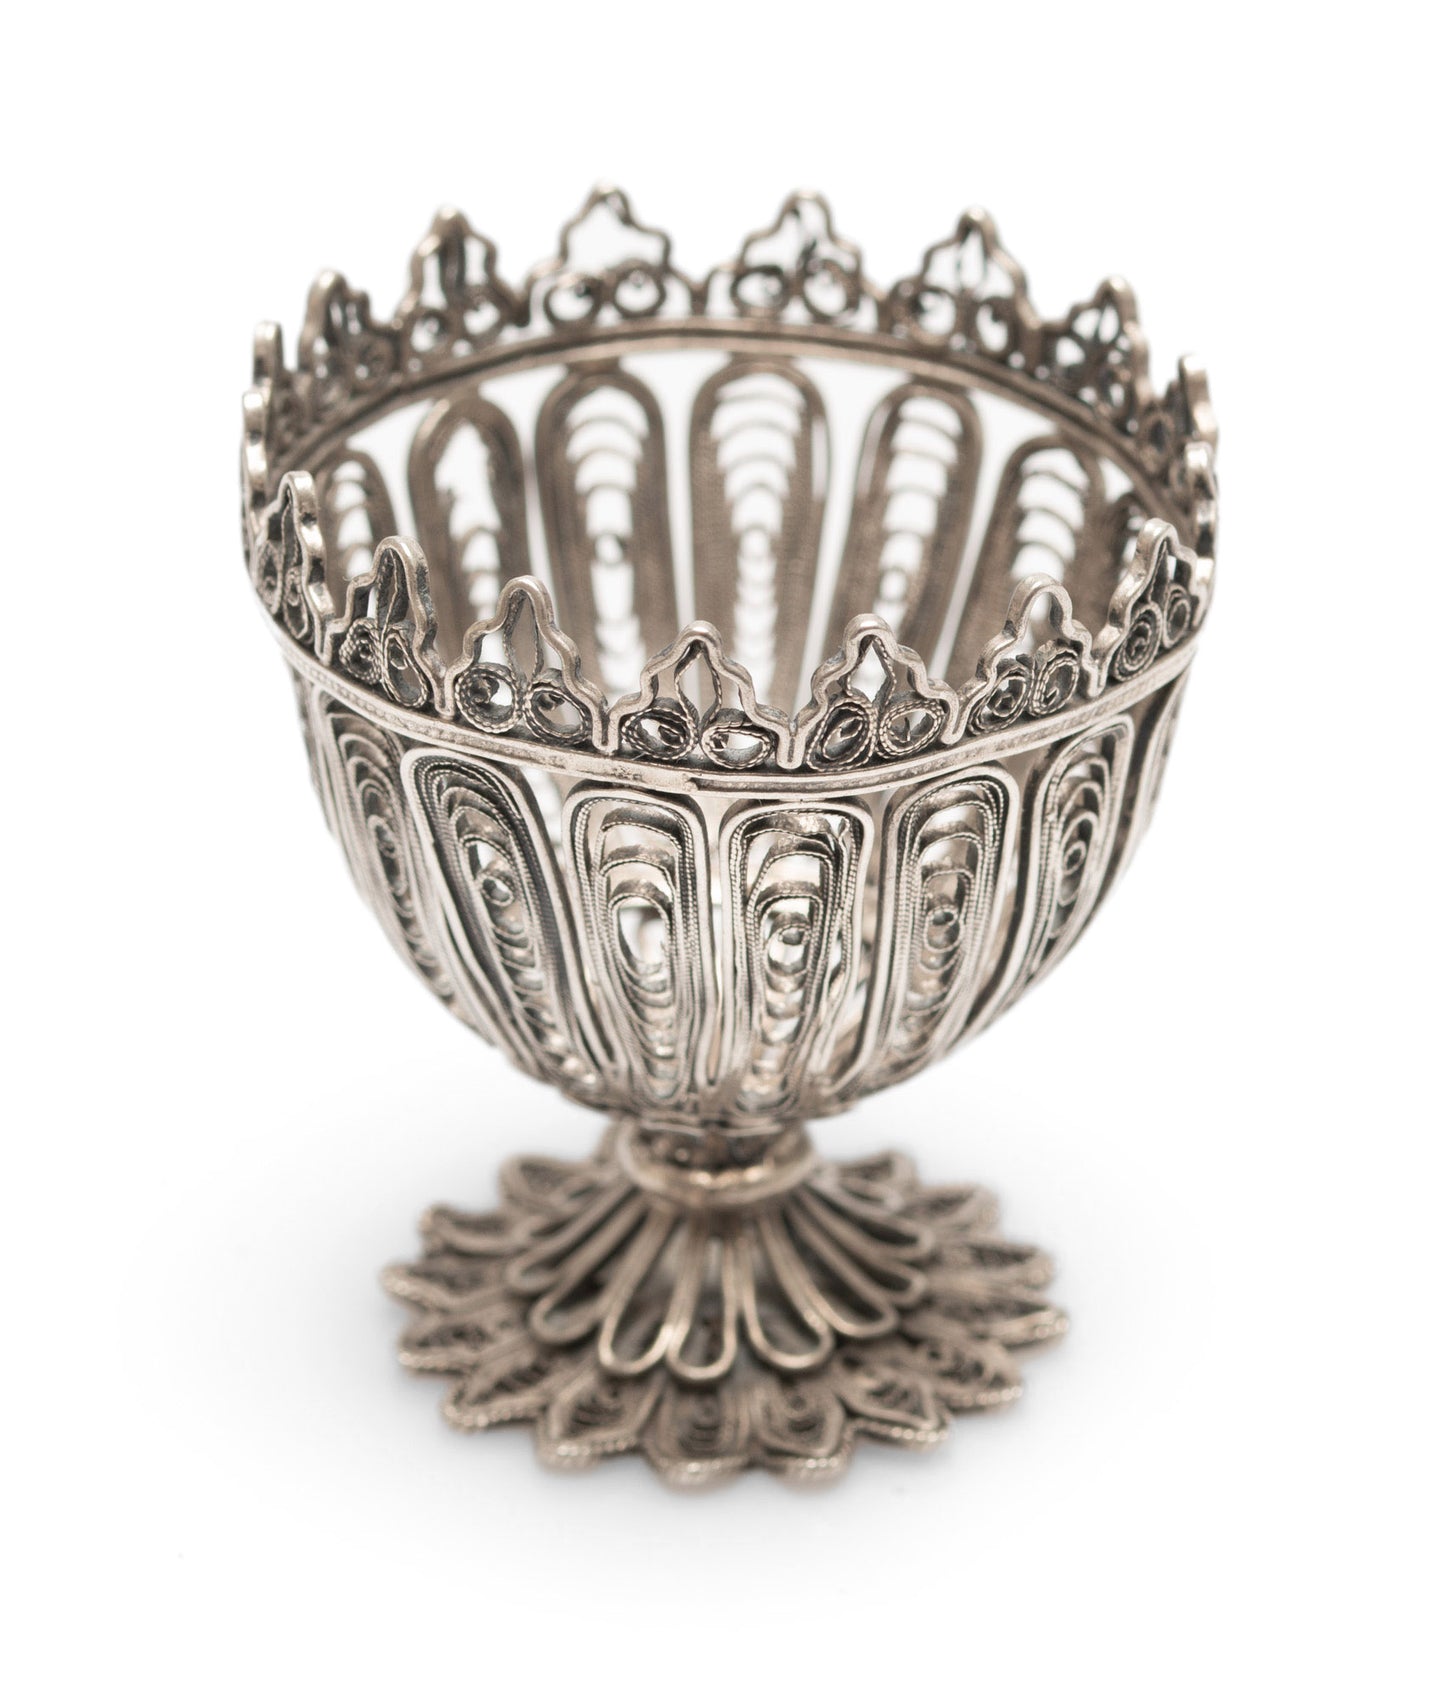 Antique Ottoman Islamic Silver Filigree Zarf With Coiled Forms & Castellated Rim (Code 2566)